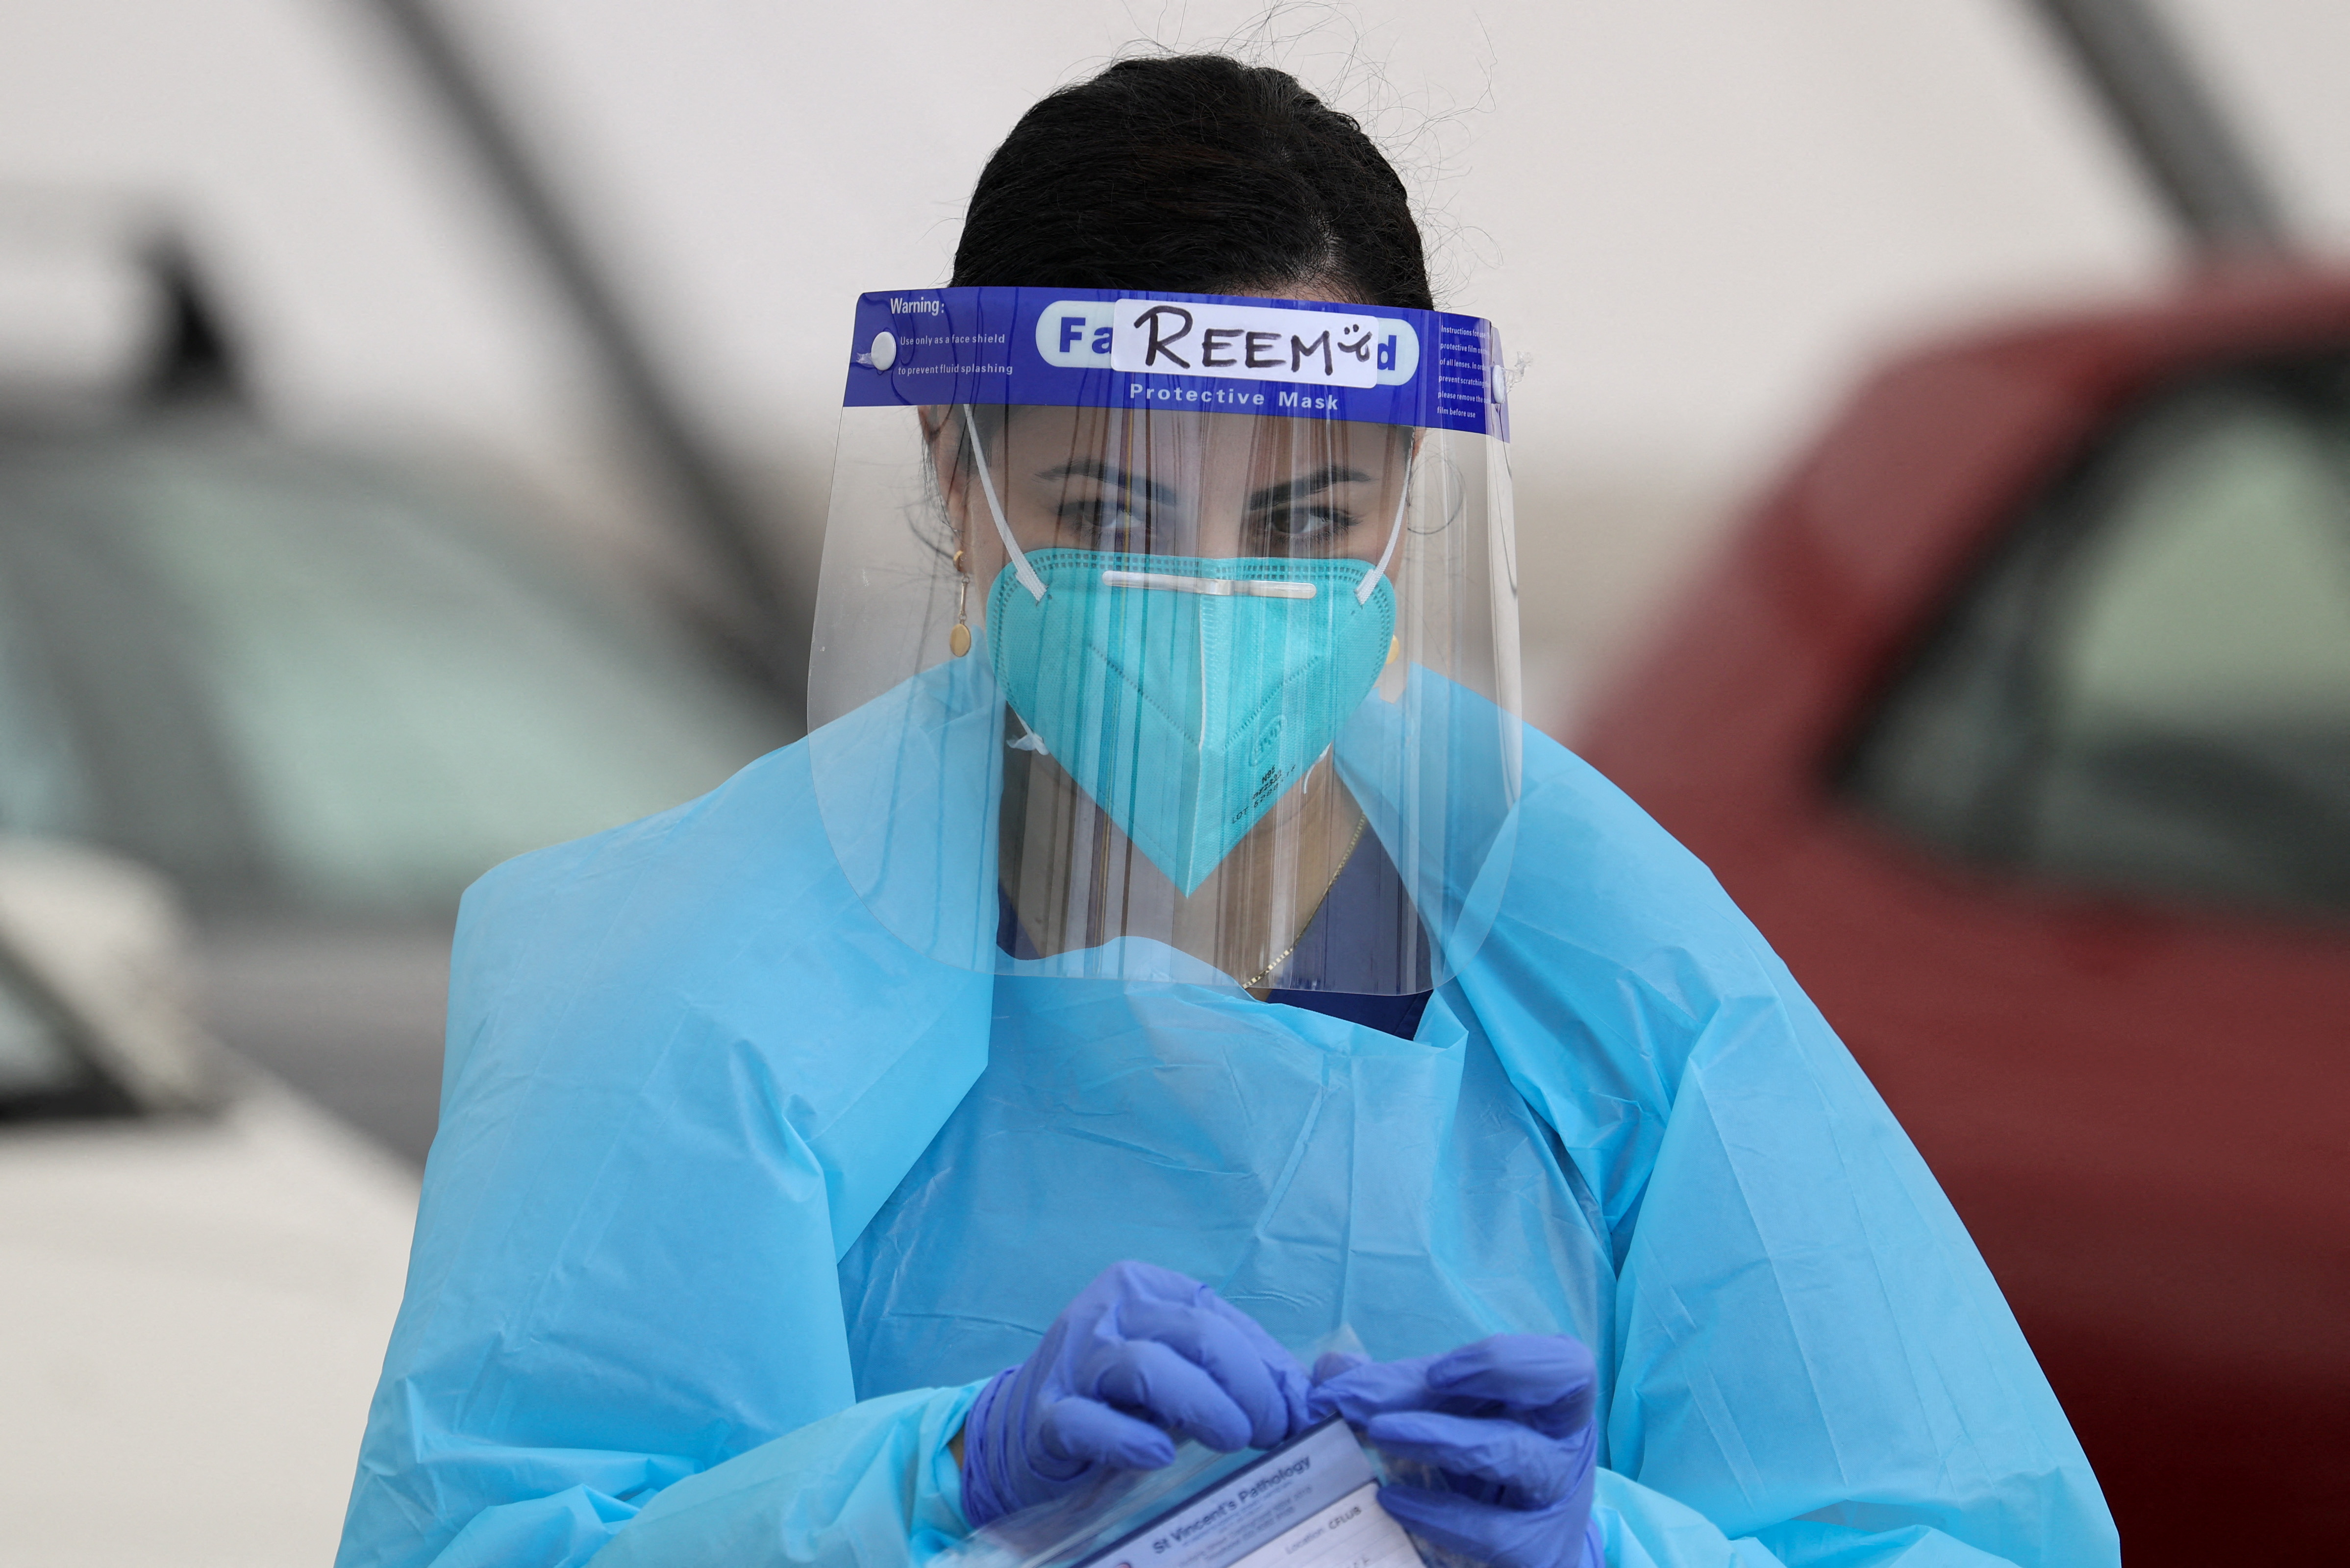 A medical worker is seen between administering tests at a drive-through COVID-19 testing centre in Sydney